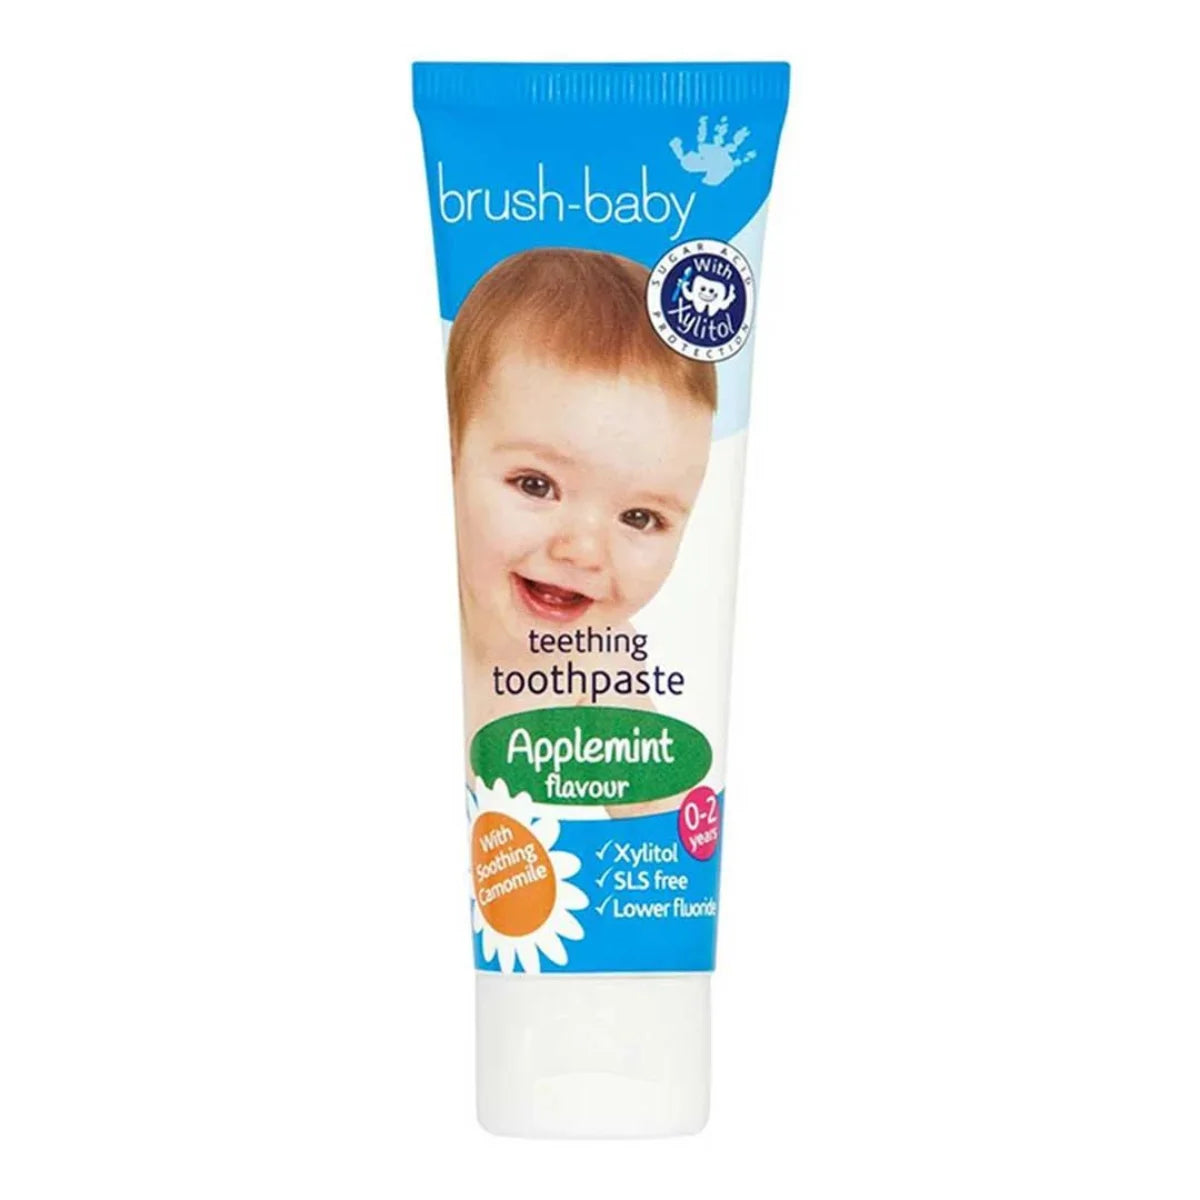 Brush Baby Applemint flavoured teething baby toothpaste